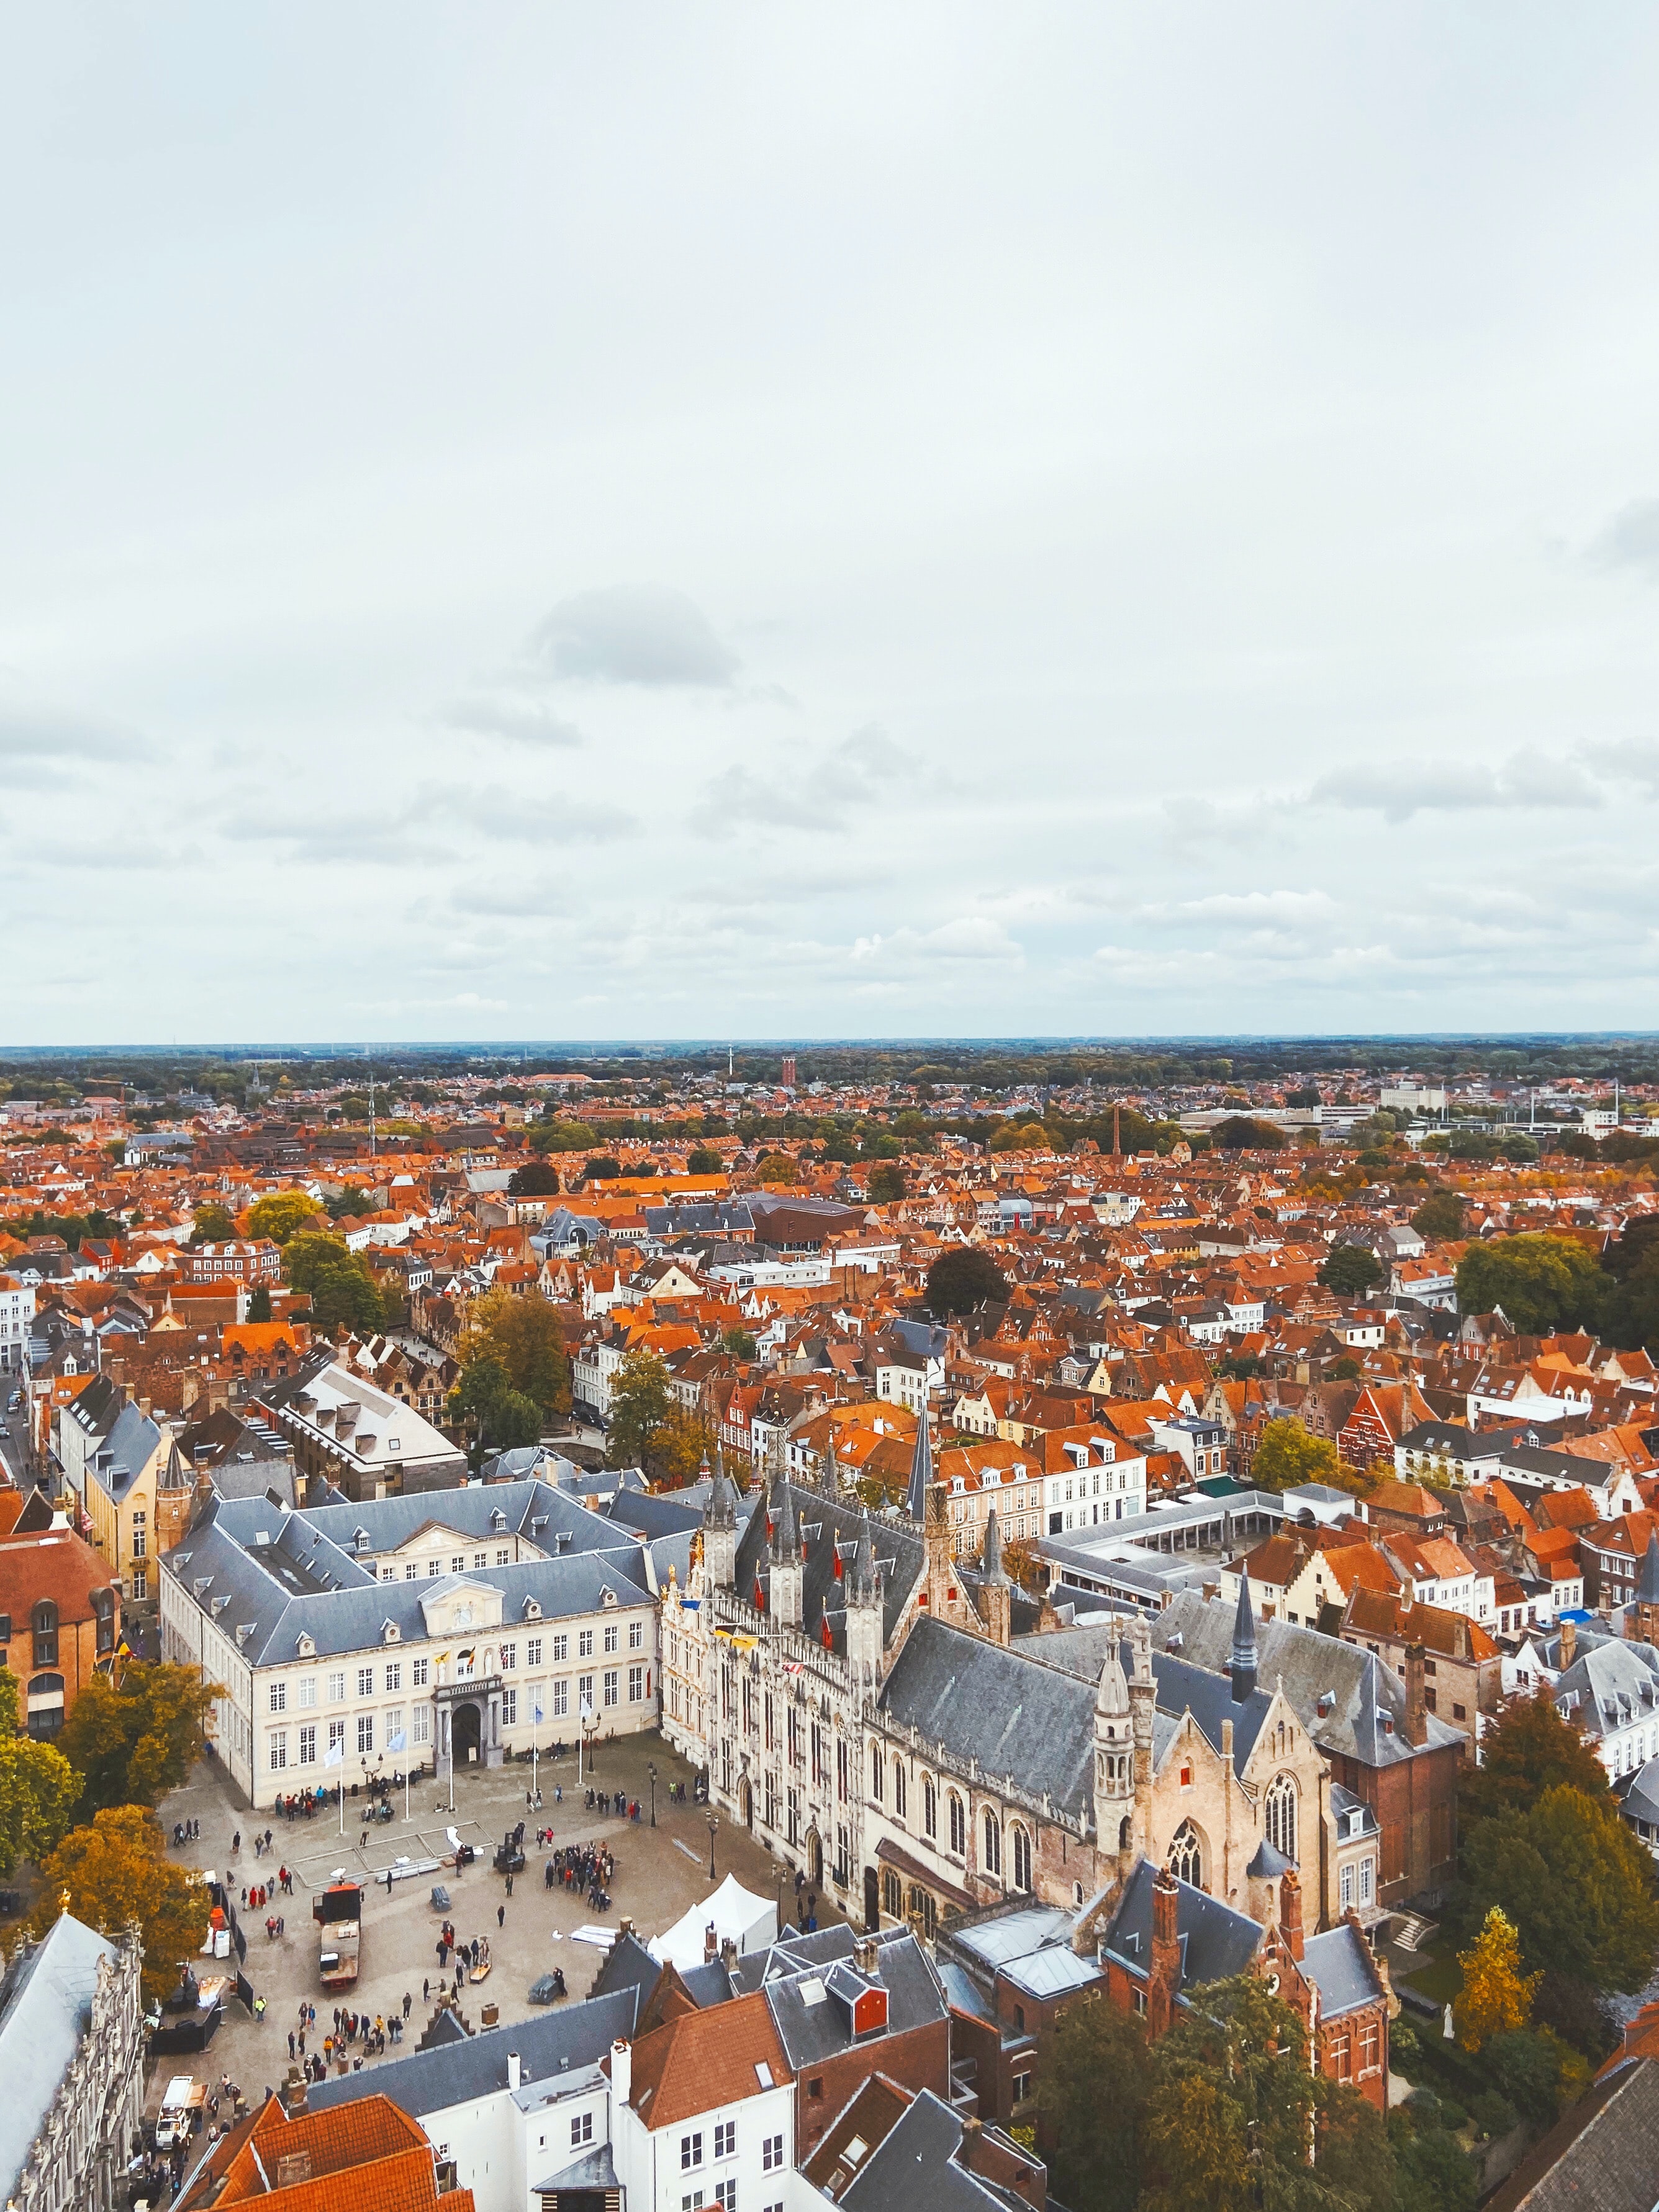 android belgium, cities, architecture, city, building, roof, roofs, bruges